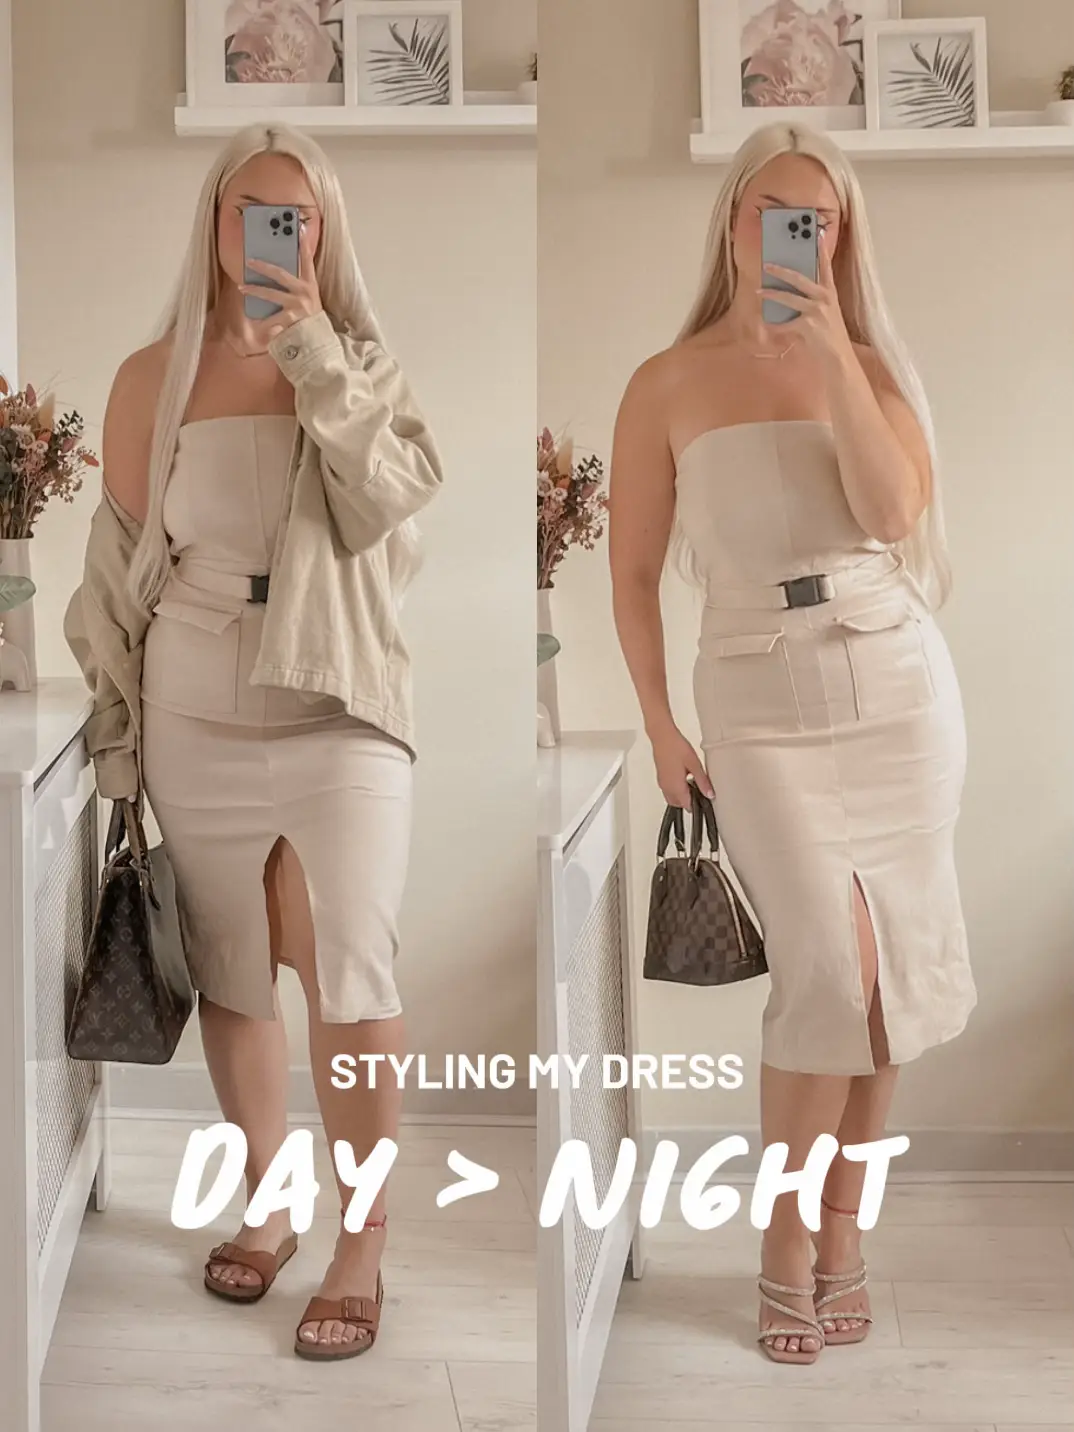 Le Fashion: A Ribbed Sweater Dress is an Easy Date Night Option